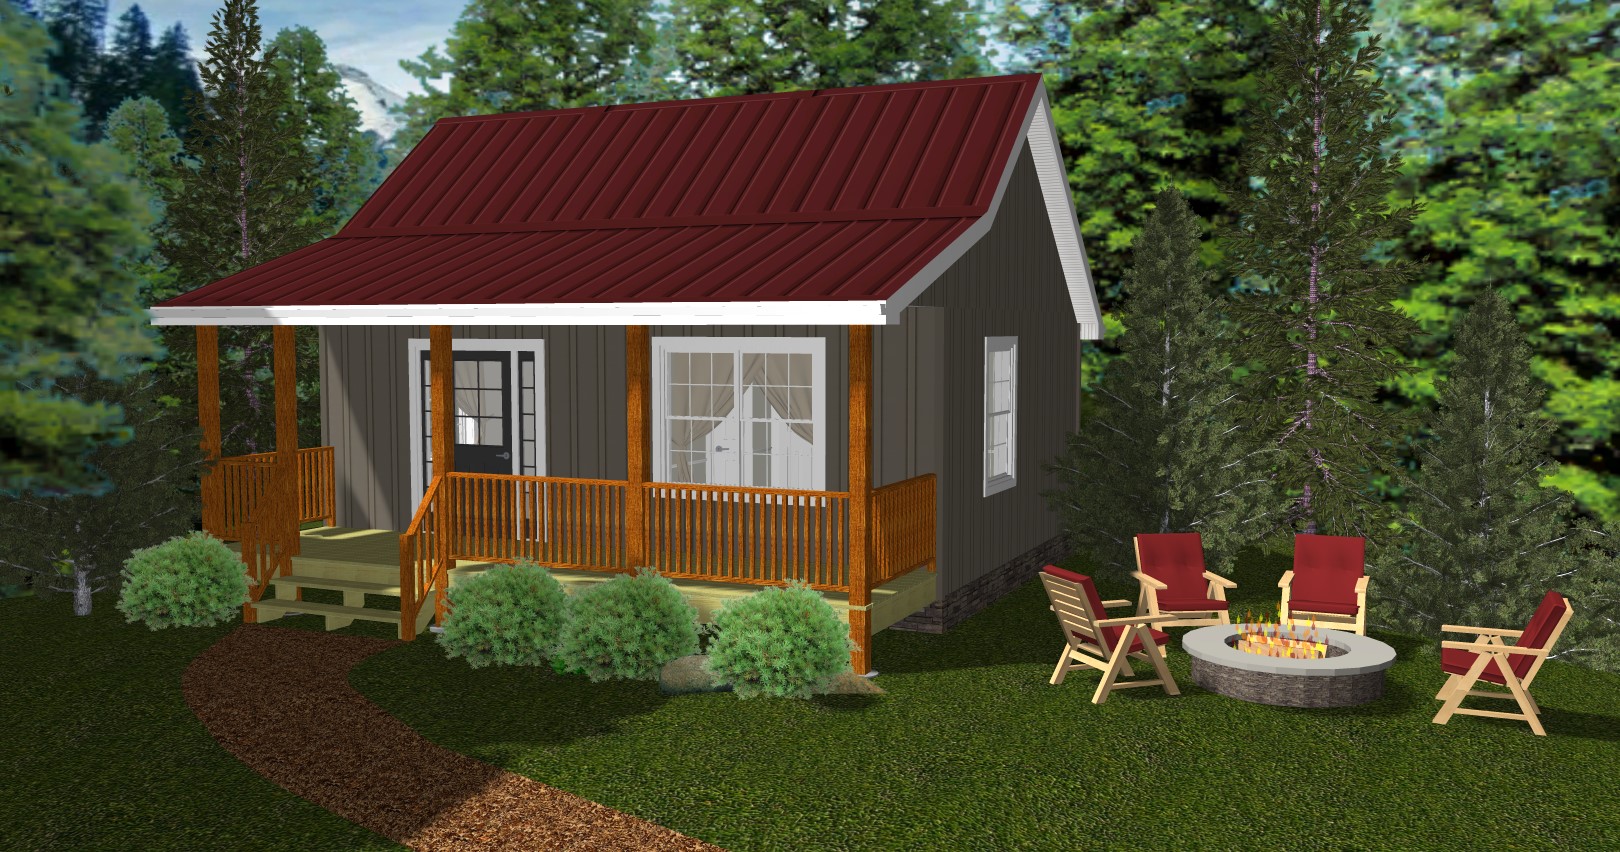 small house plans under 900 sq ft